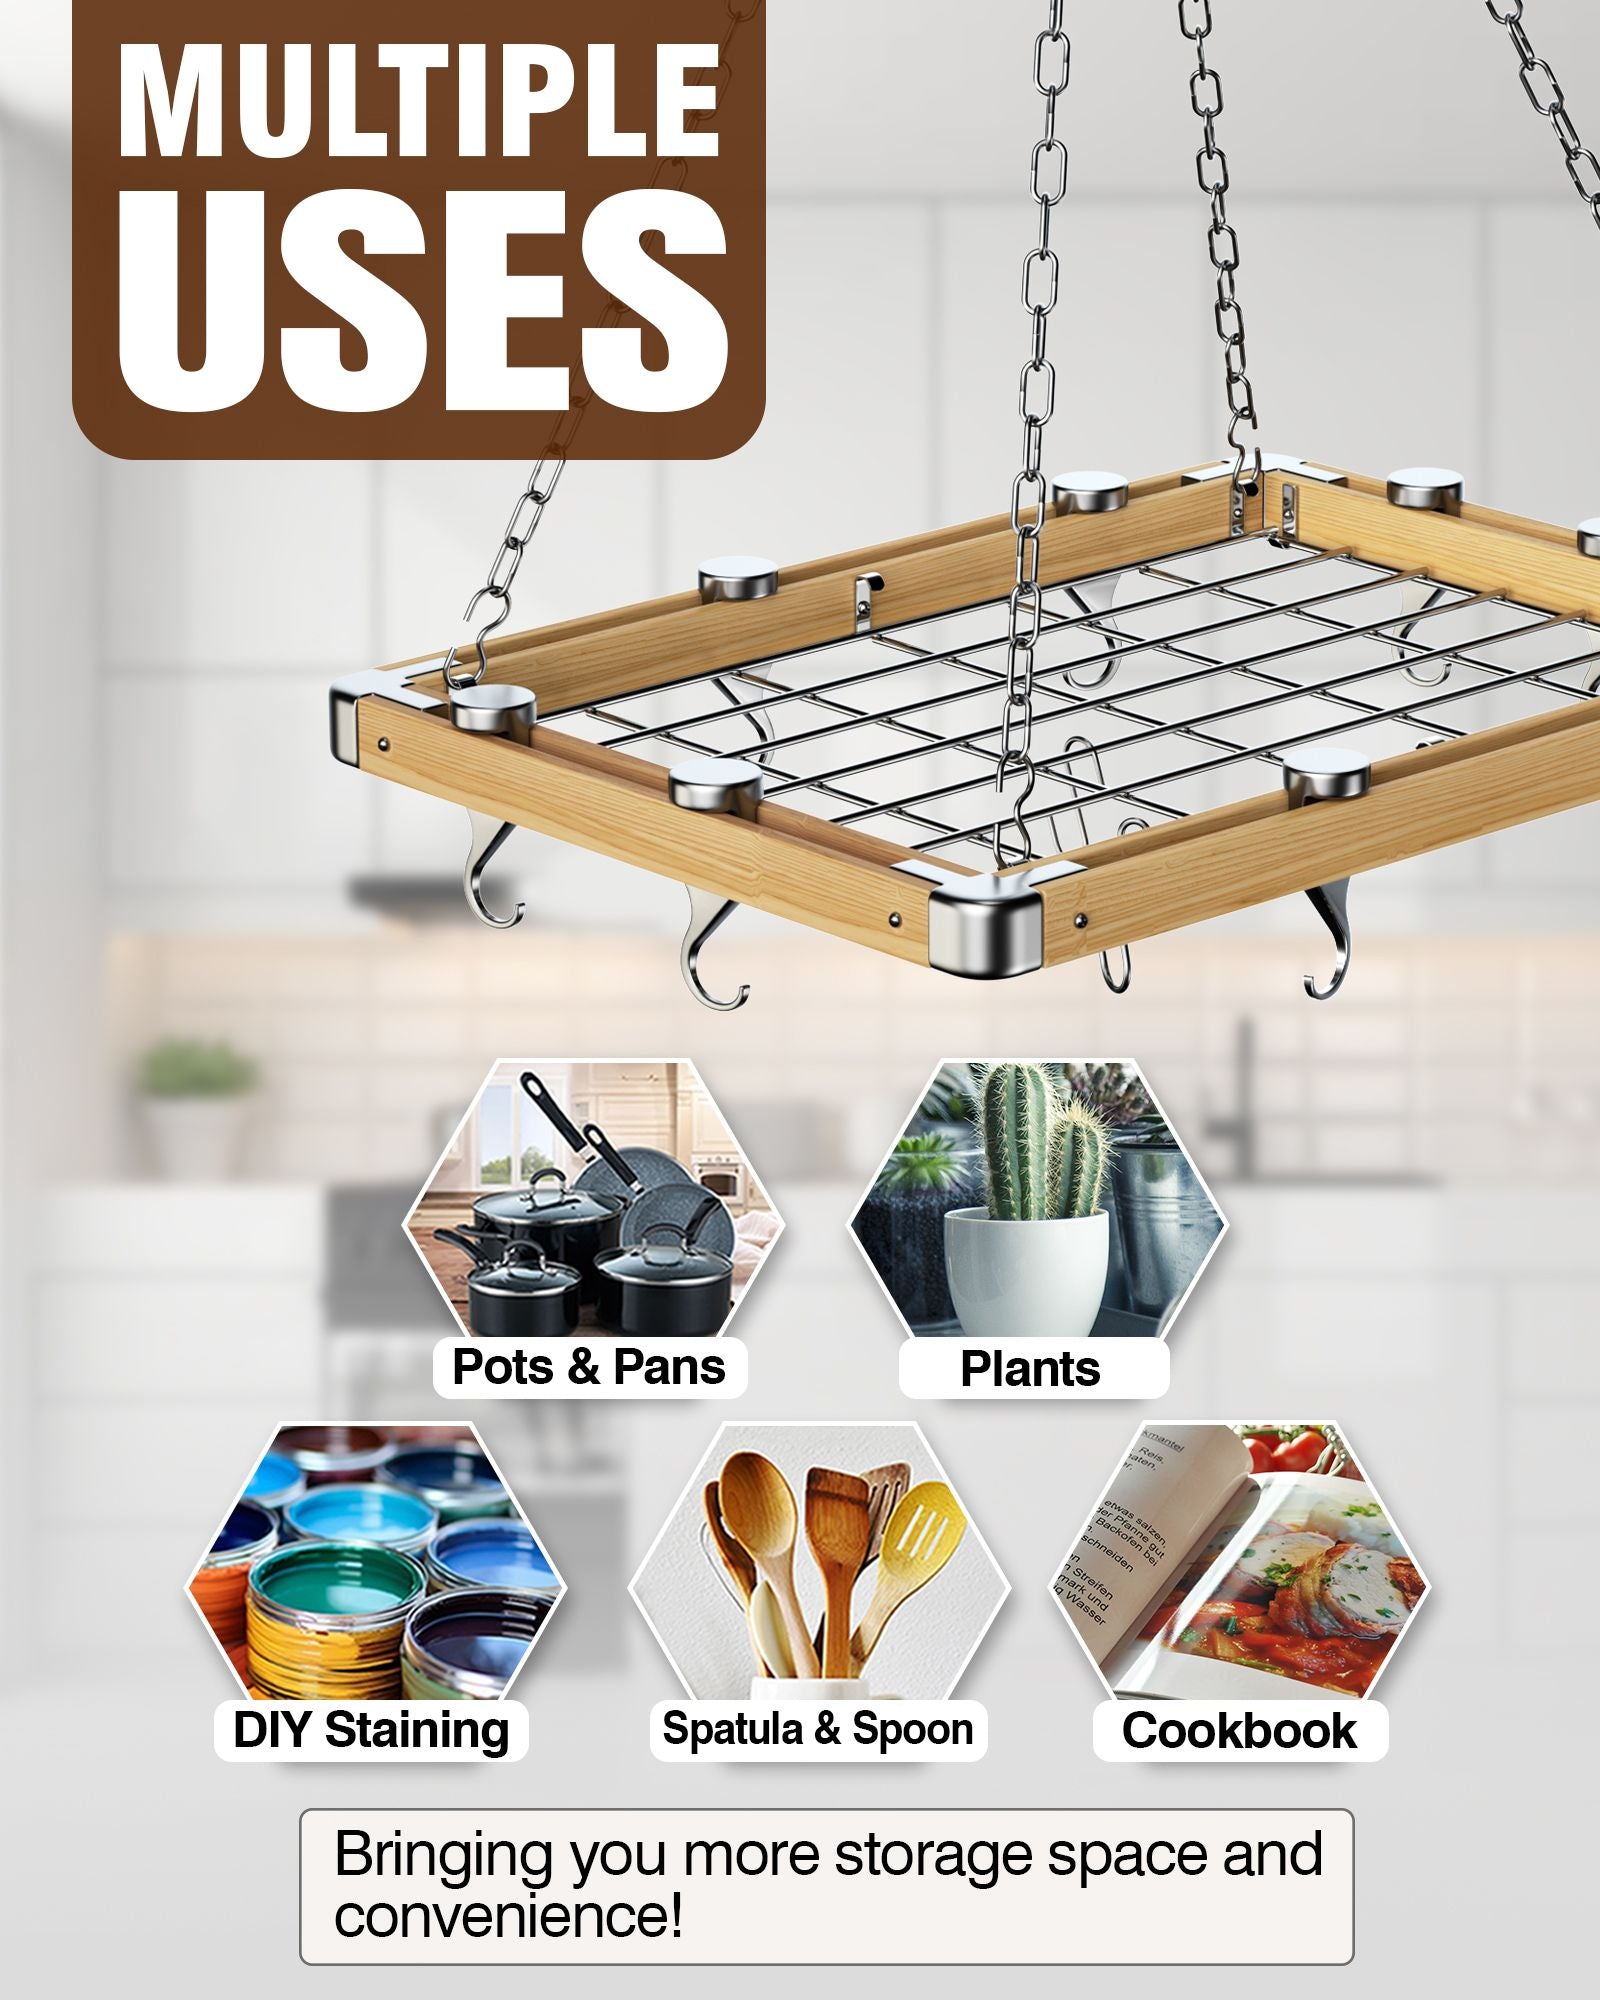 Cooks Standard Ceiling Mounted Wooden Pot Rack with Metal Grate, Movab